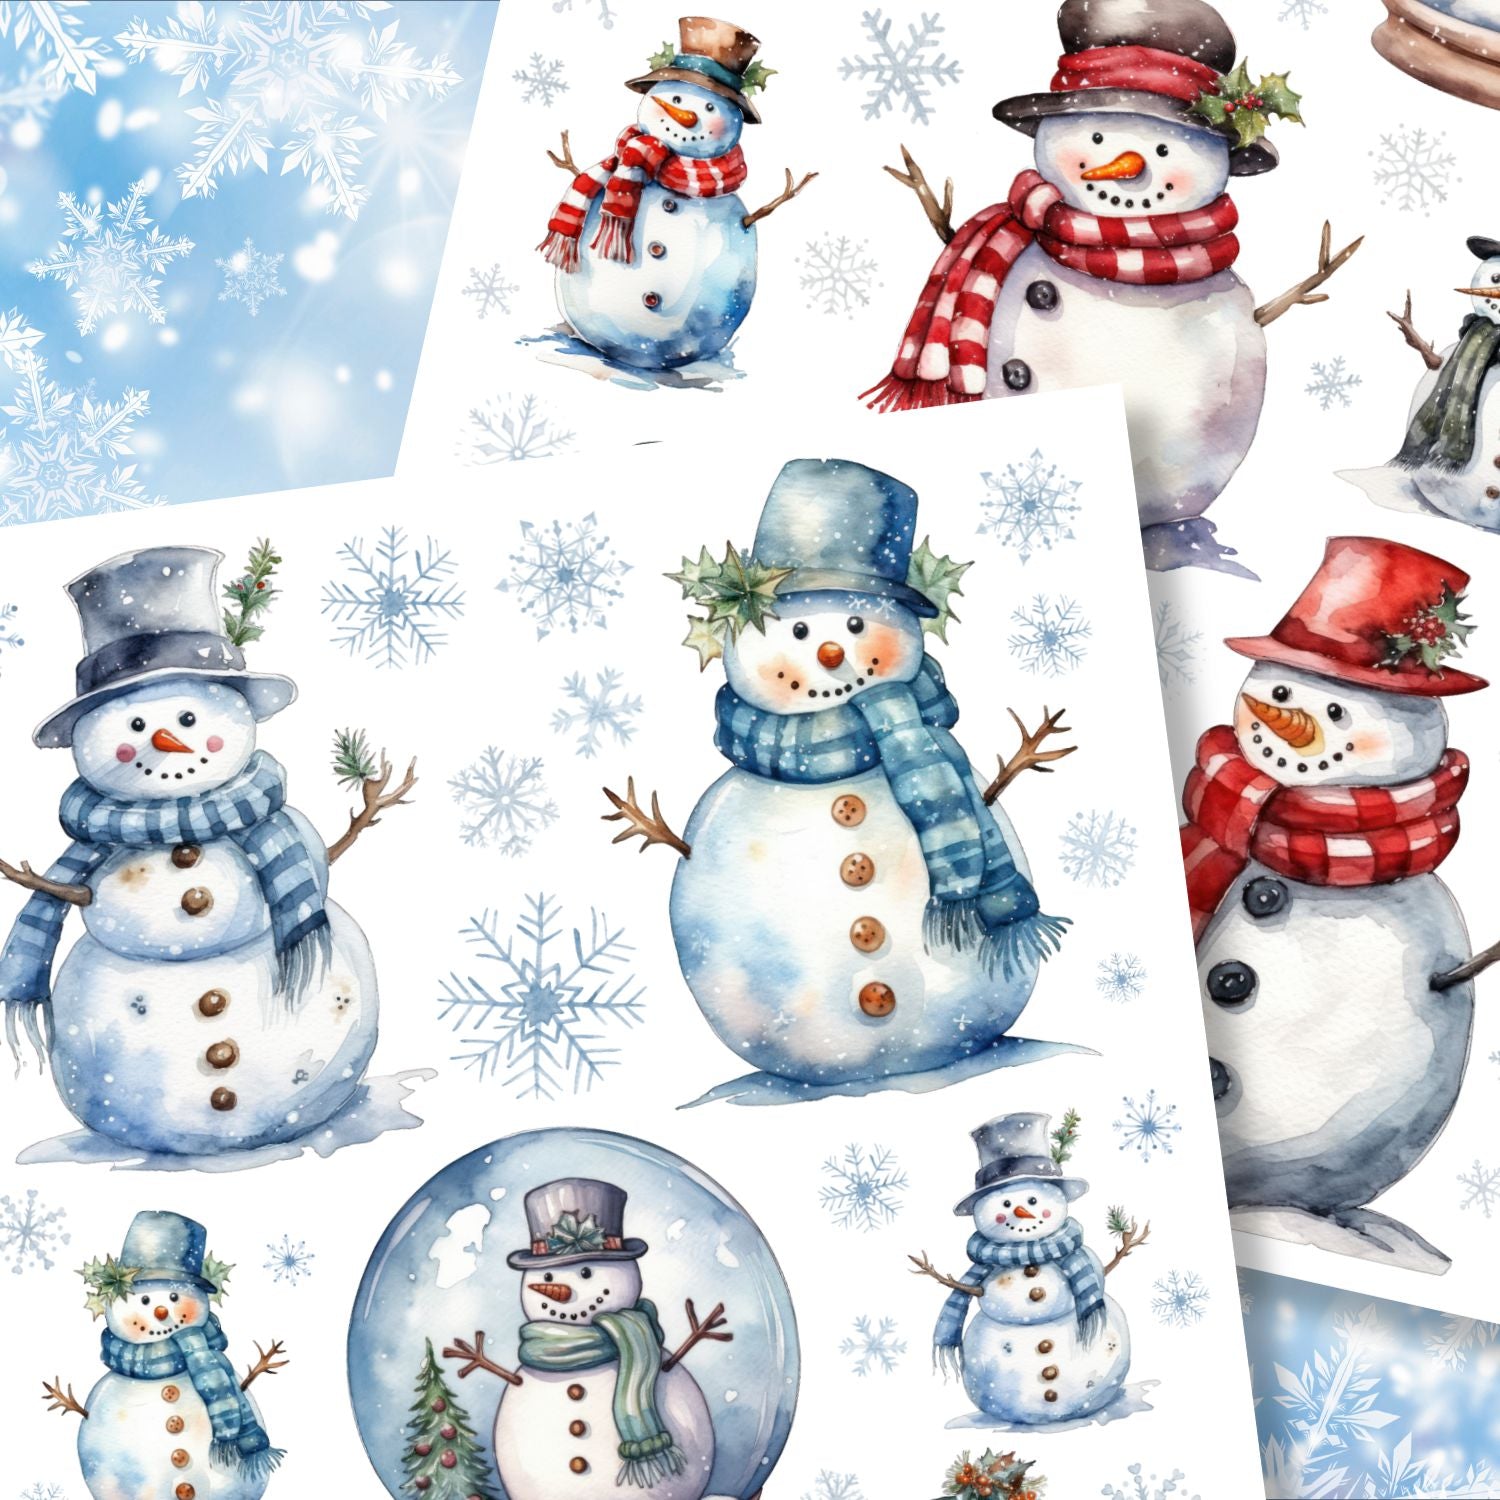 Honoson 20 Sheets Winter Rub on Transfers for Crafts and Furniture Snowman  Snowflake Rub on Transfer Stickers Vintage Winter Gnome Rub on Decals for